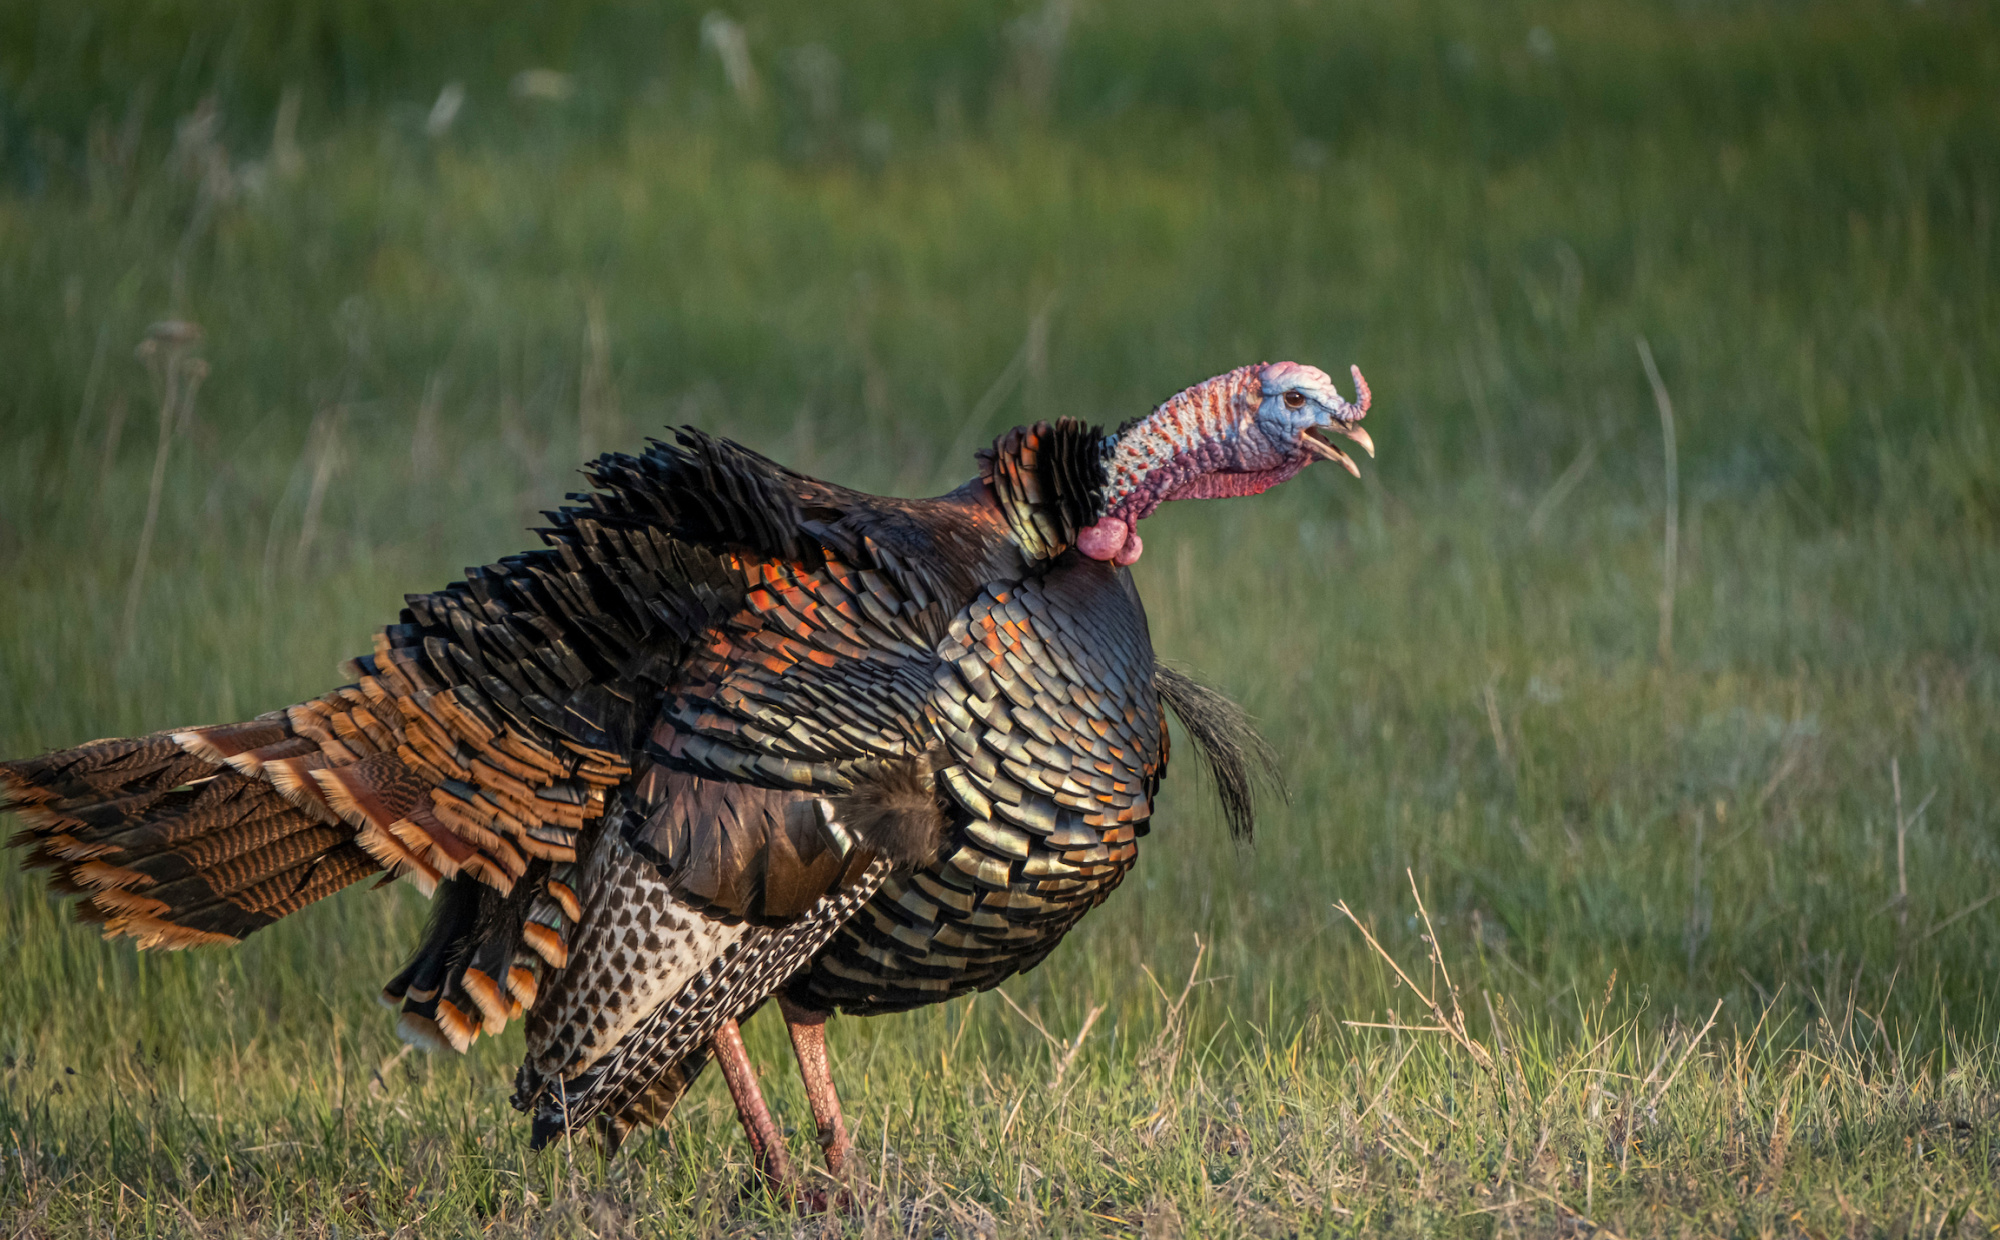 Indiana Police Officers Cited for Turkey Poaching in Kentucky